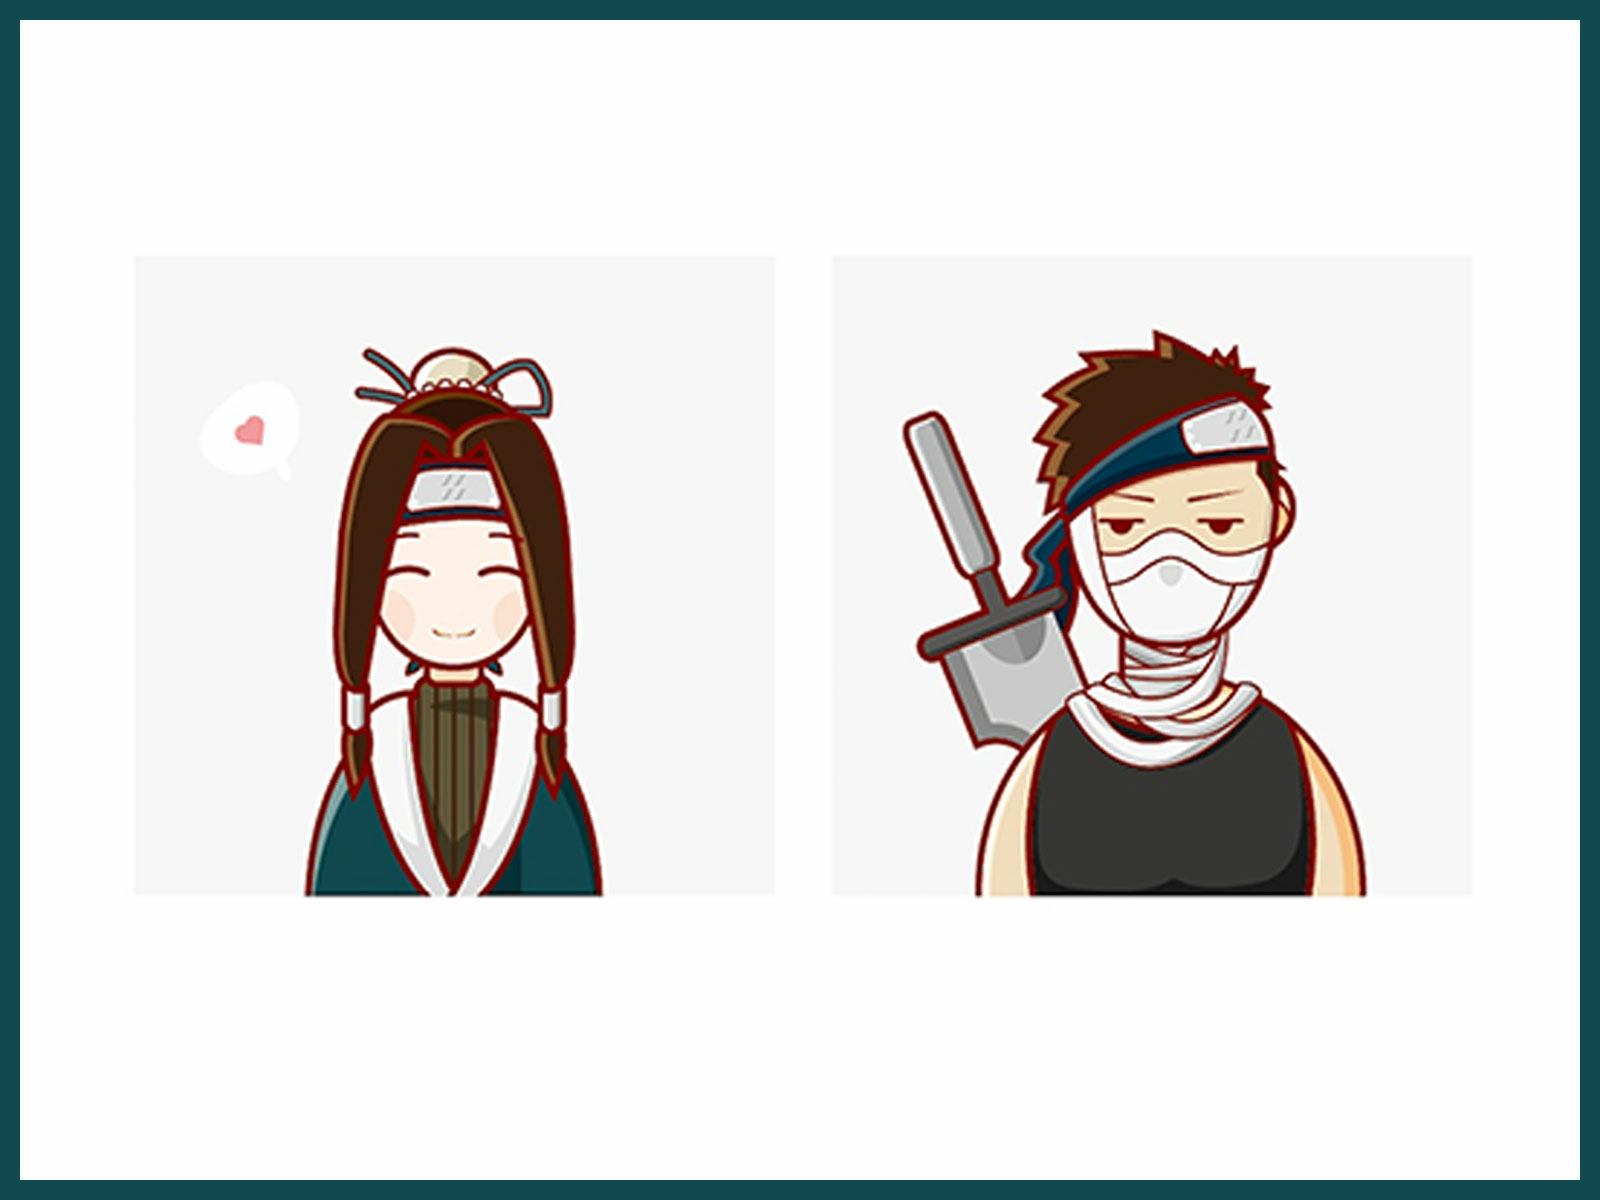 Illustrations Of ハク ザブザ Naruto By Xiaonan For Pxeed On Dribbble